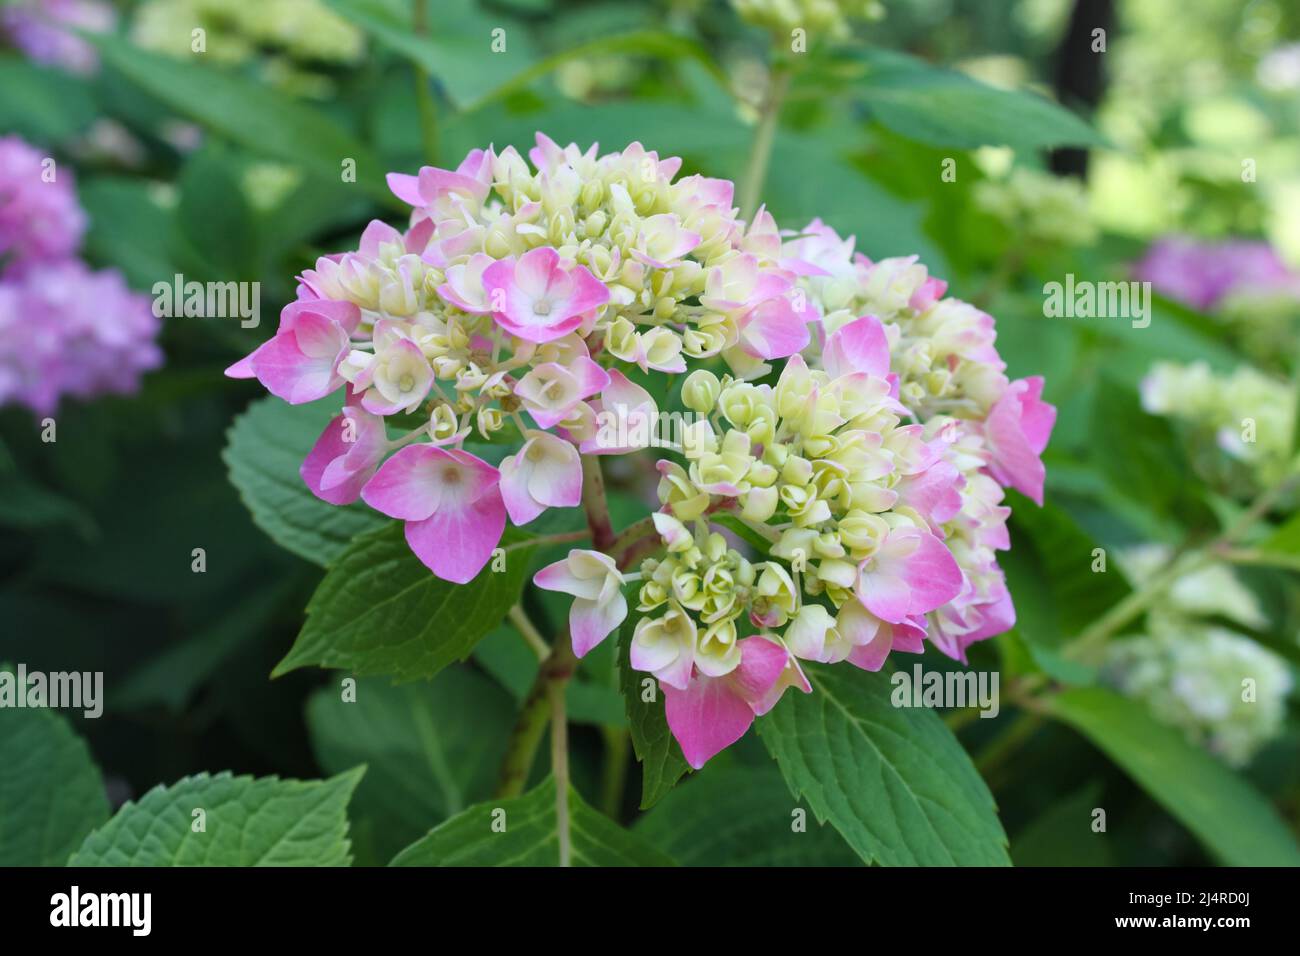 Beautiful purple pink hydrangea just starting to bloom against background of blurred green leaves Stock Photo